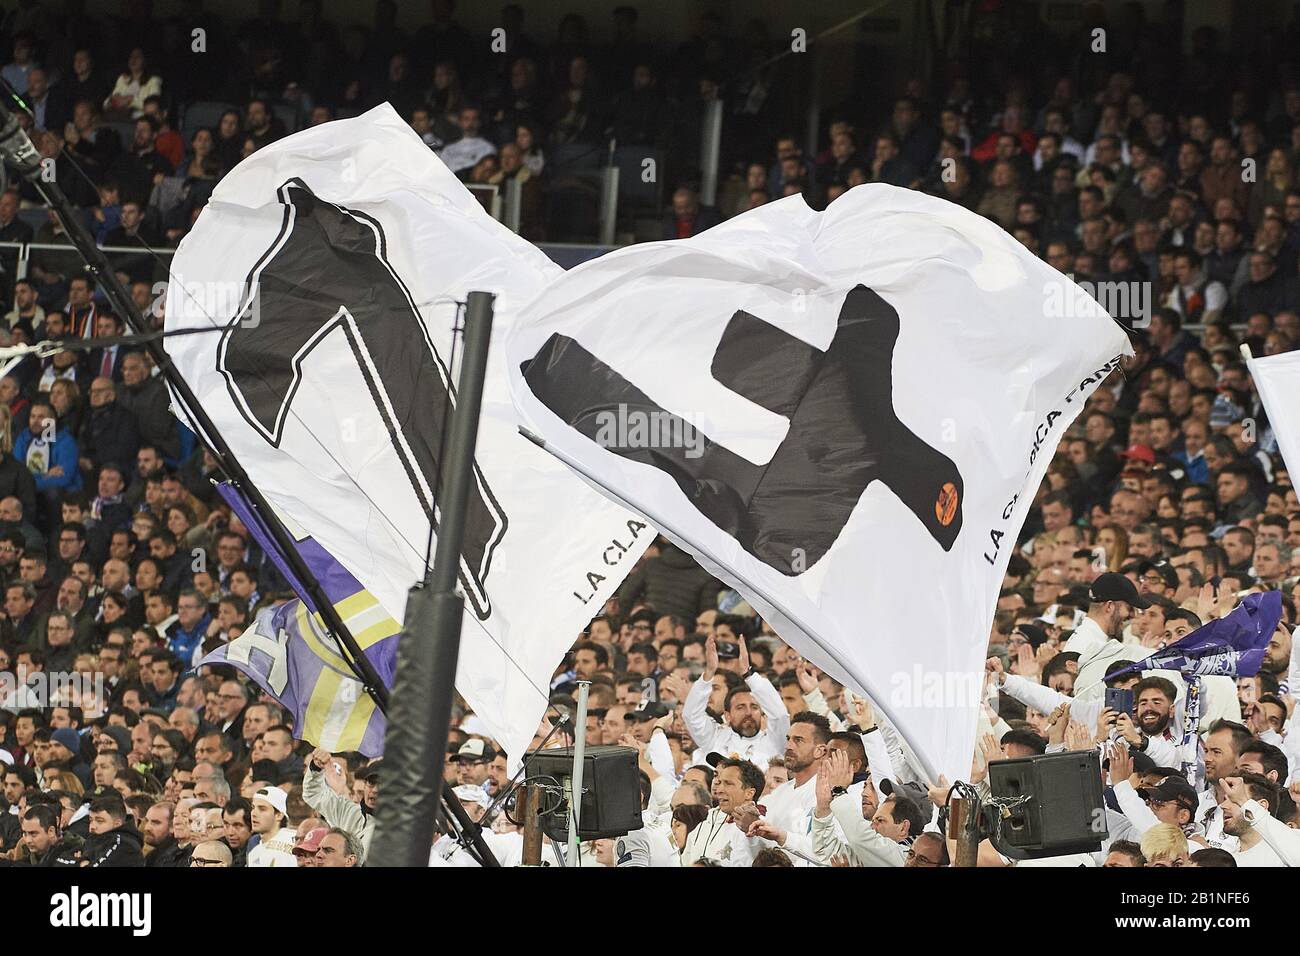 Madrid, Spain. 26th Feb, 2020. Atmosphere during the UEFA Champions League round of 16 first leg match between Real Madrid and Manchester City F.C. at Santiago Bernabeu on February 26, 2020 in Madrid, Spain Credit: Jack Abuin/ZUMA Wire/Alamy Live News Stock Photo